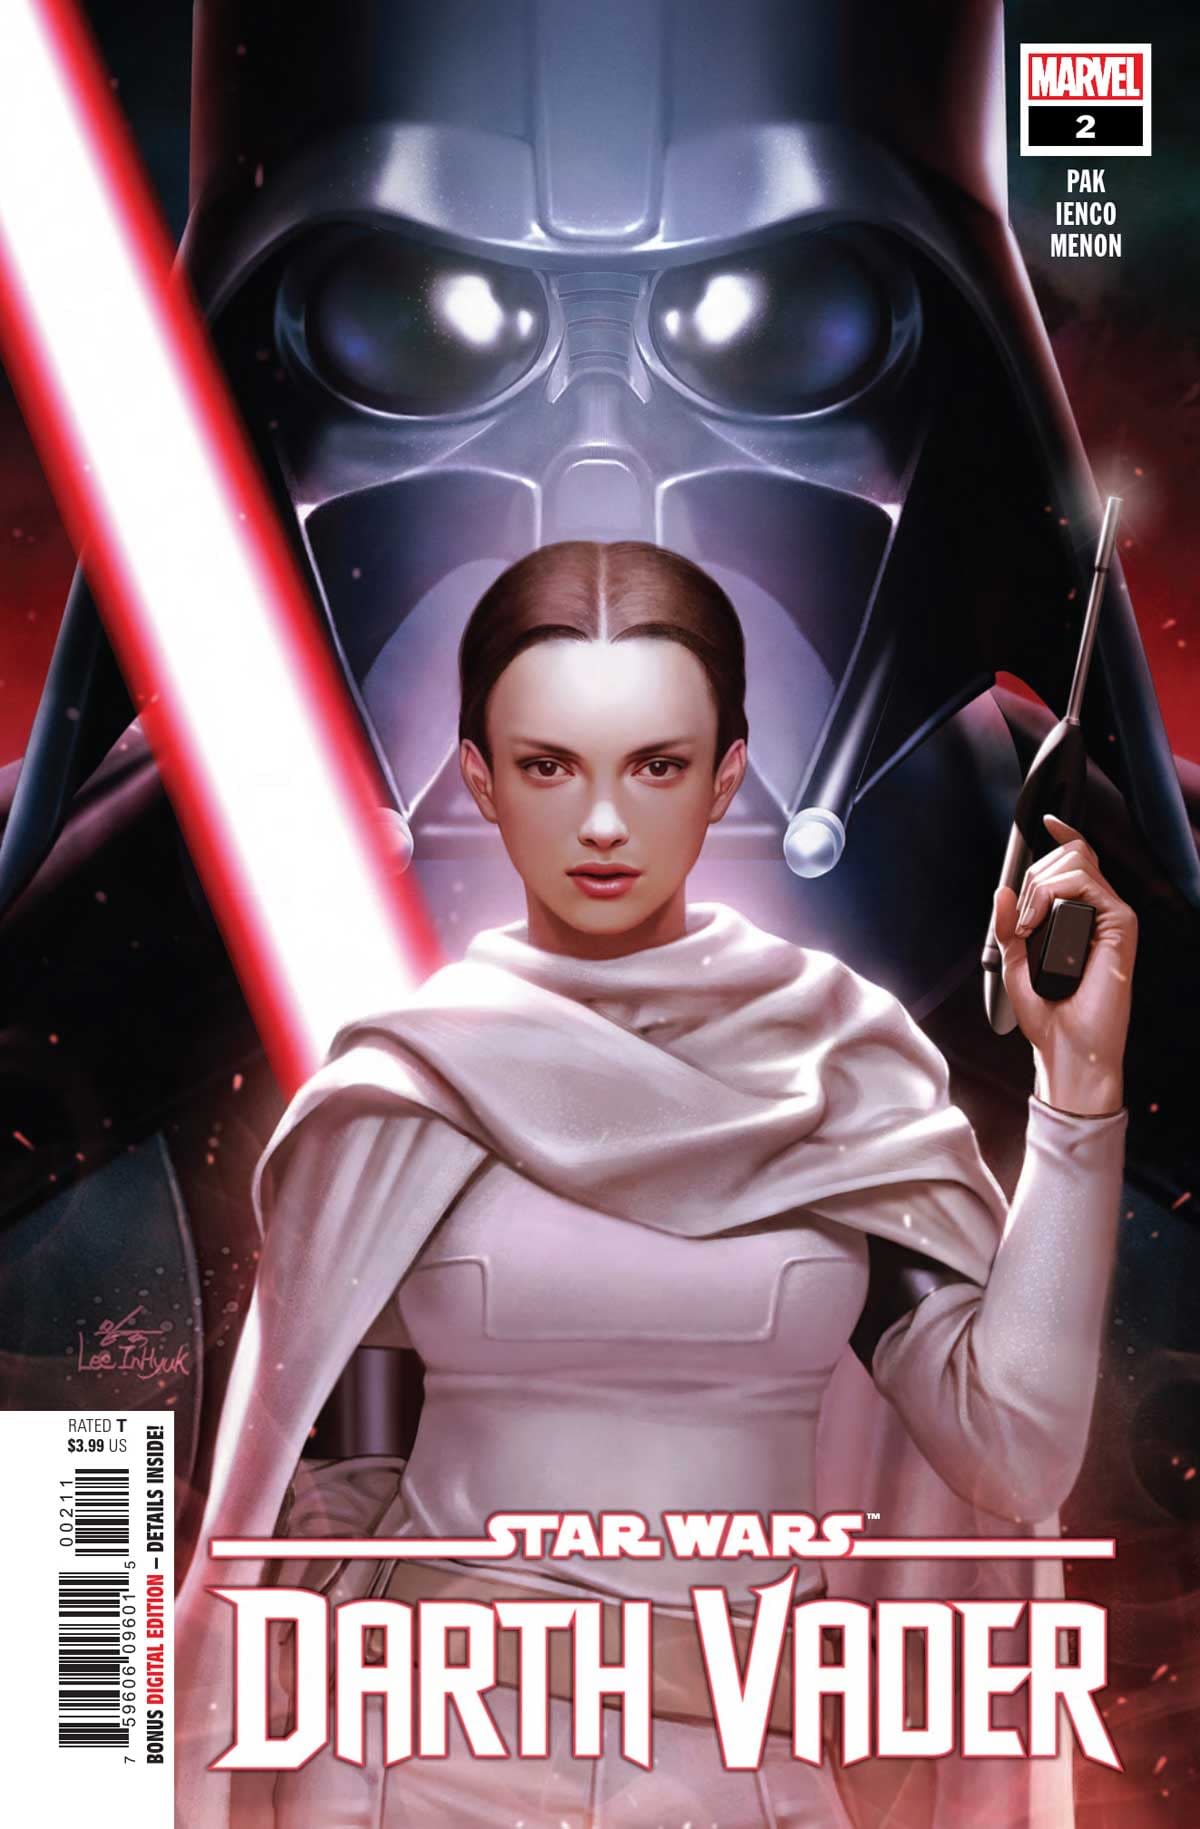 REVIEW: Star Wars Darth Vader #2 -- "Won't Mean As Much For People Who Can't Quote The Canon Pretty Effectively"